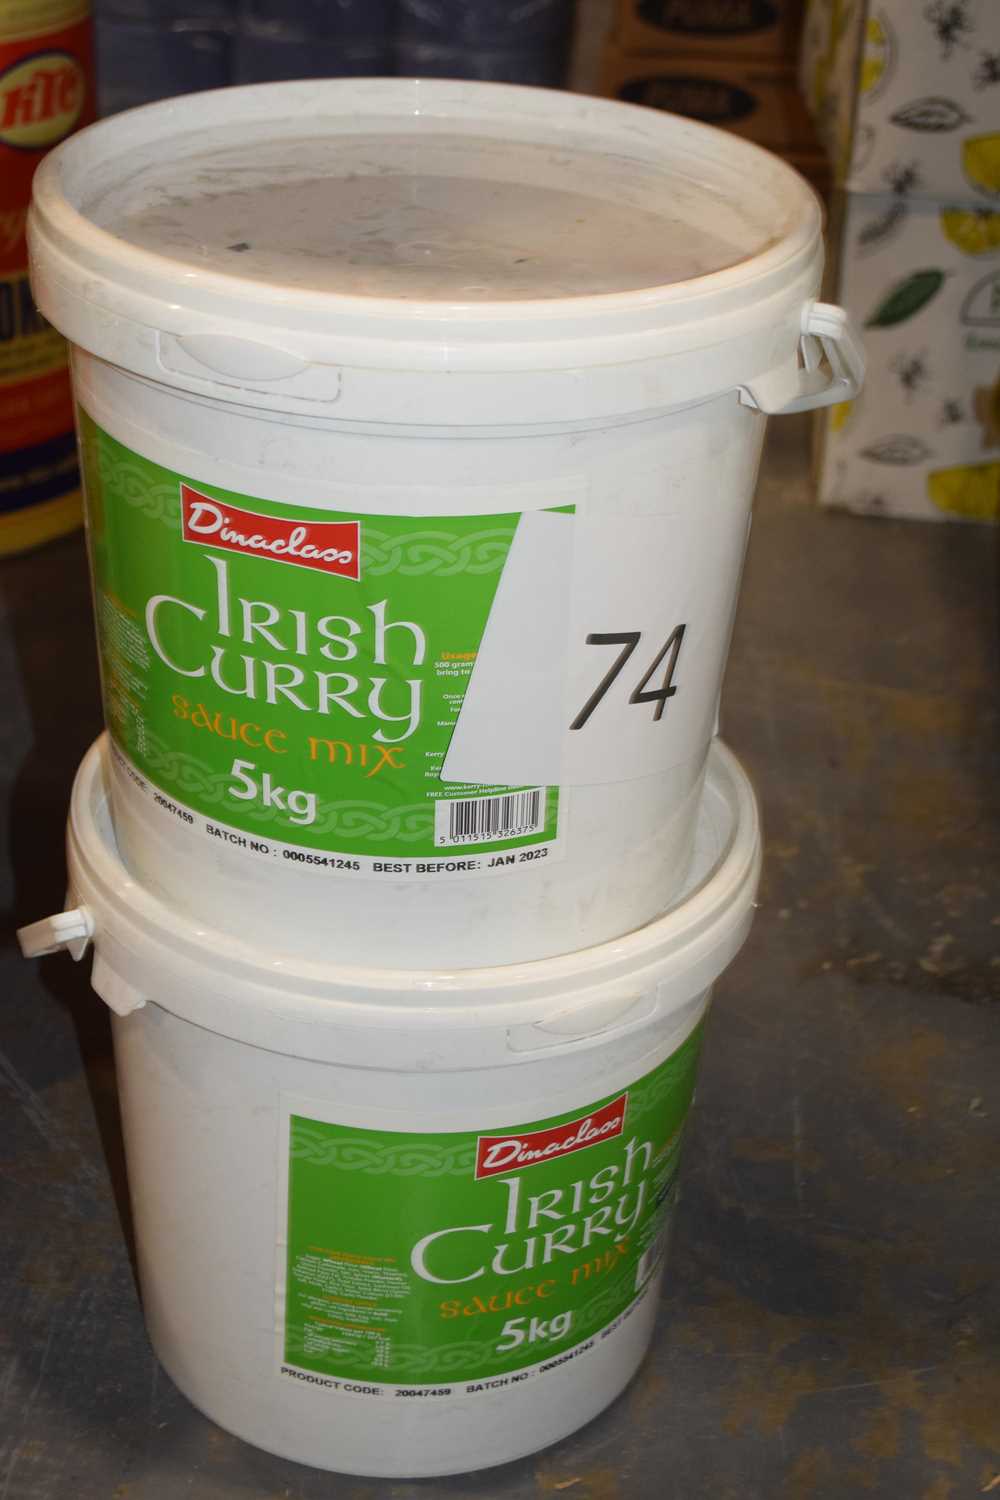 Lot 74 - Two buckets of Irish Curry Sauce Mix. Best